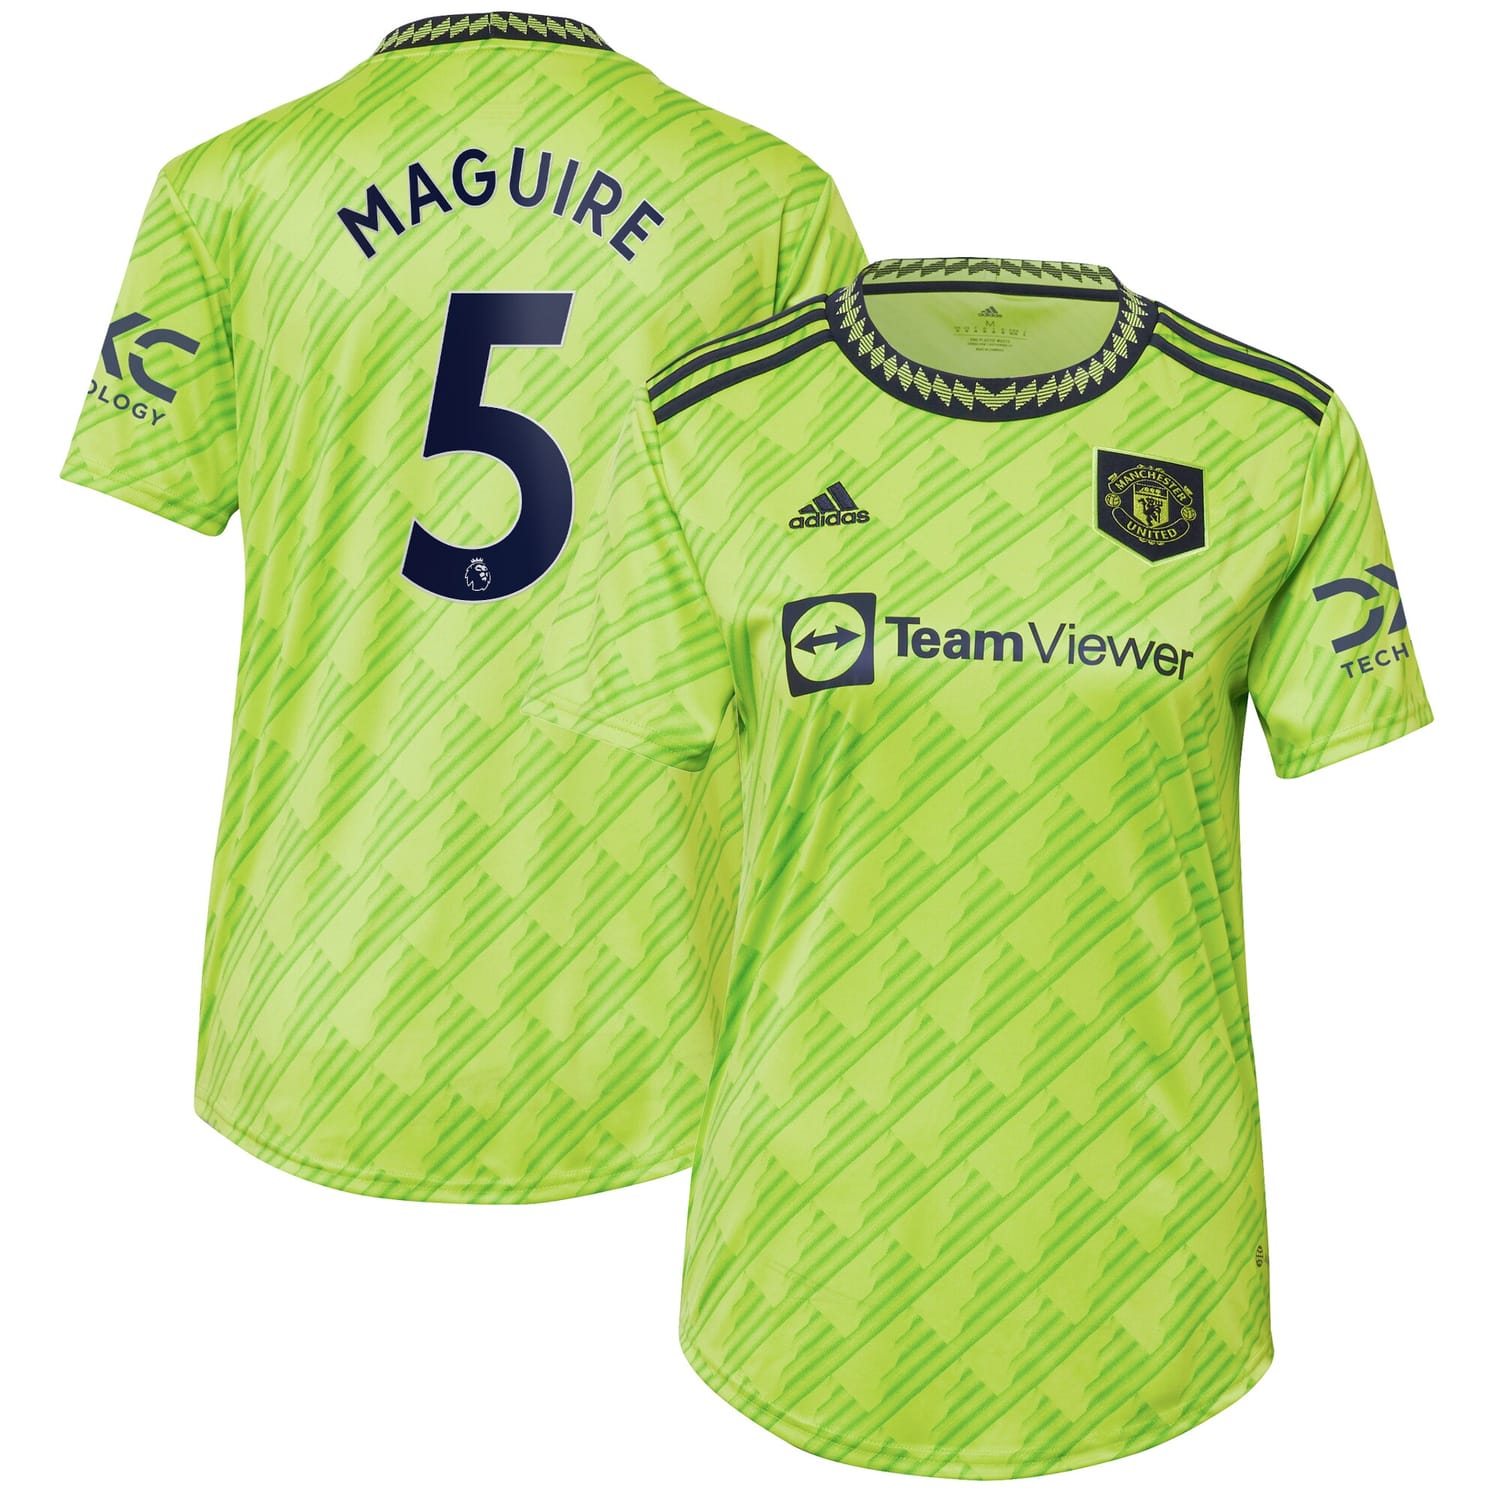 Premier League Manchester United Third Jersey Shirt Neon Green 2022-23 player Harry Maguire printing for Women